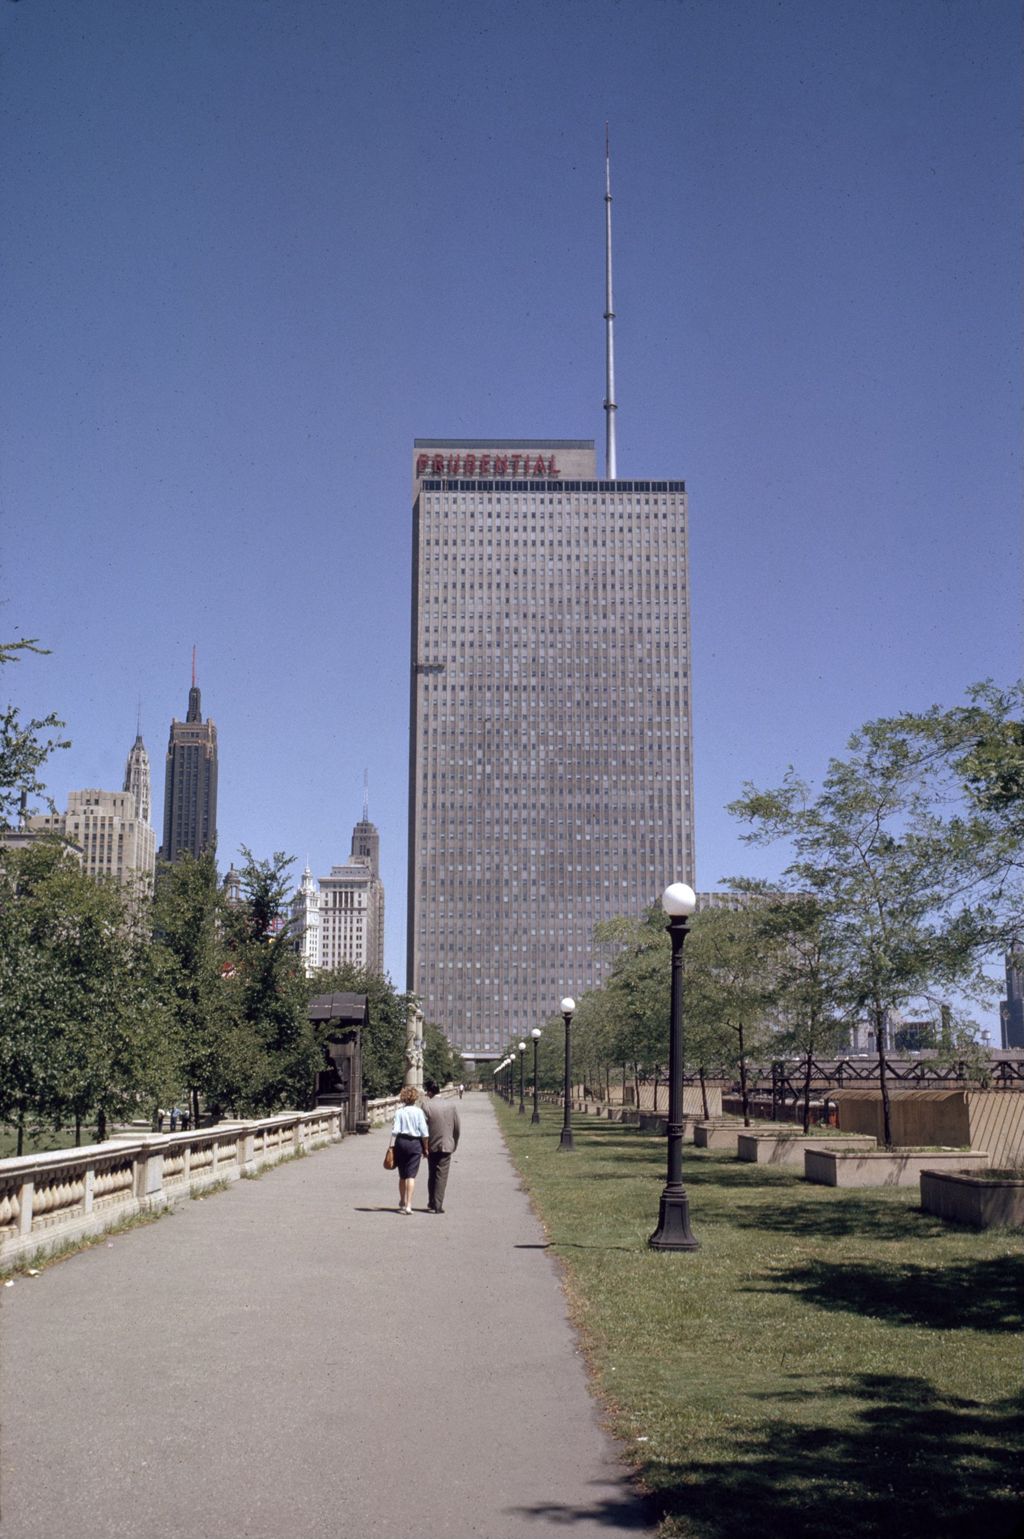 Miniature of Prudential Building from Grant Park